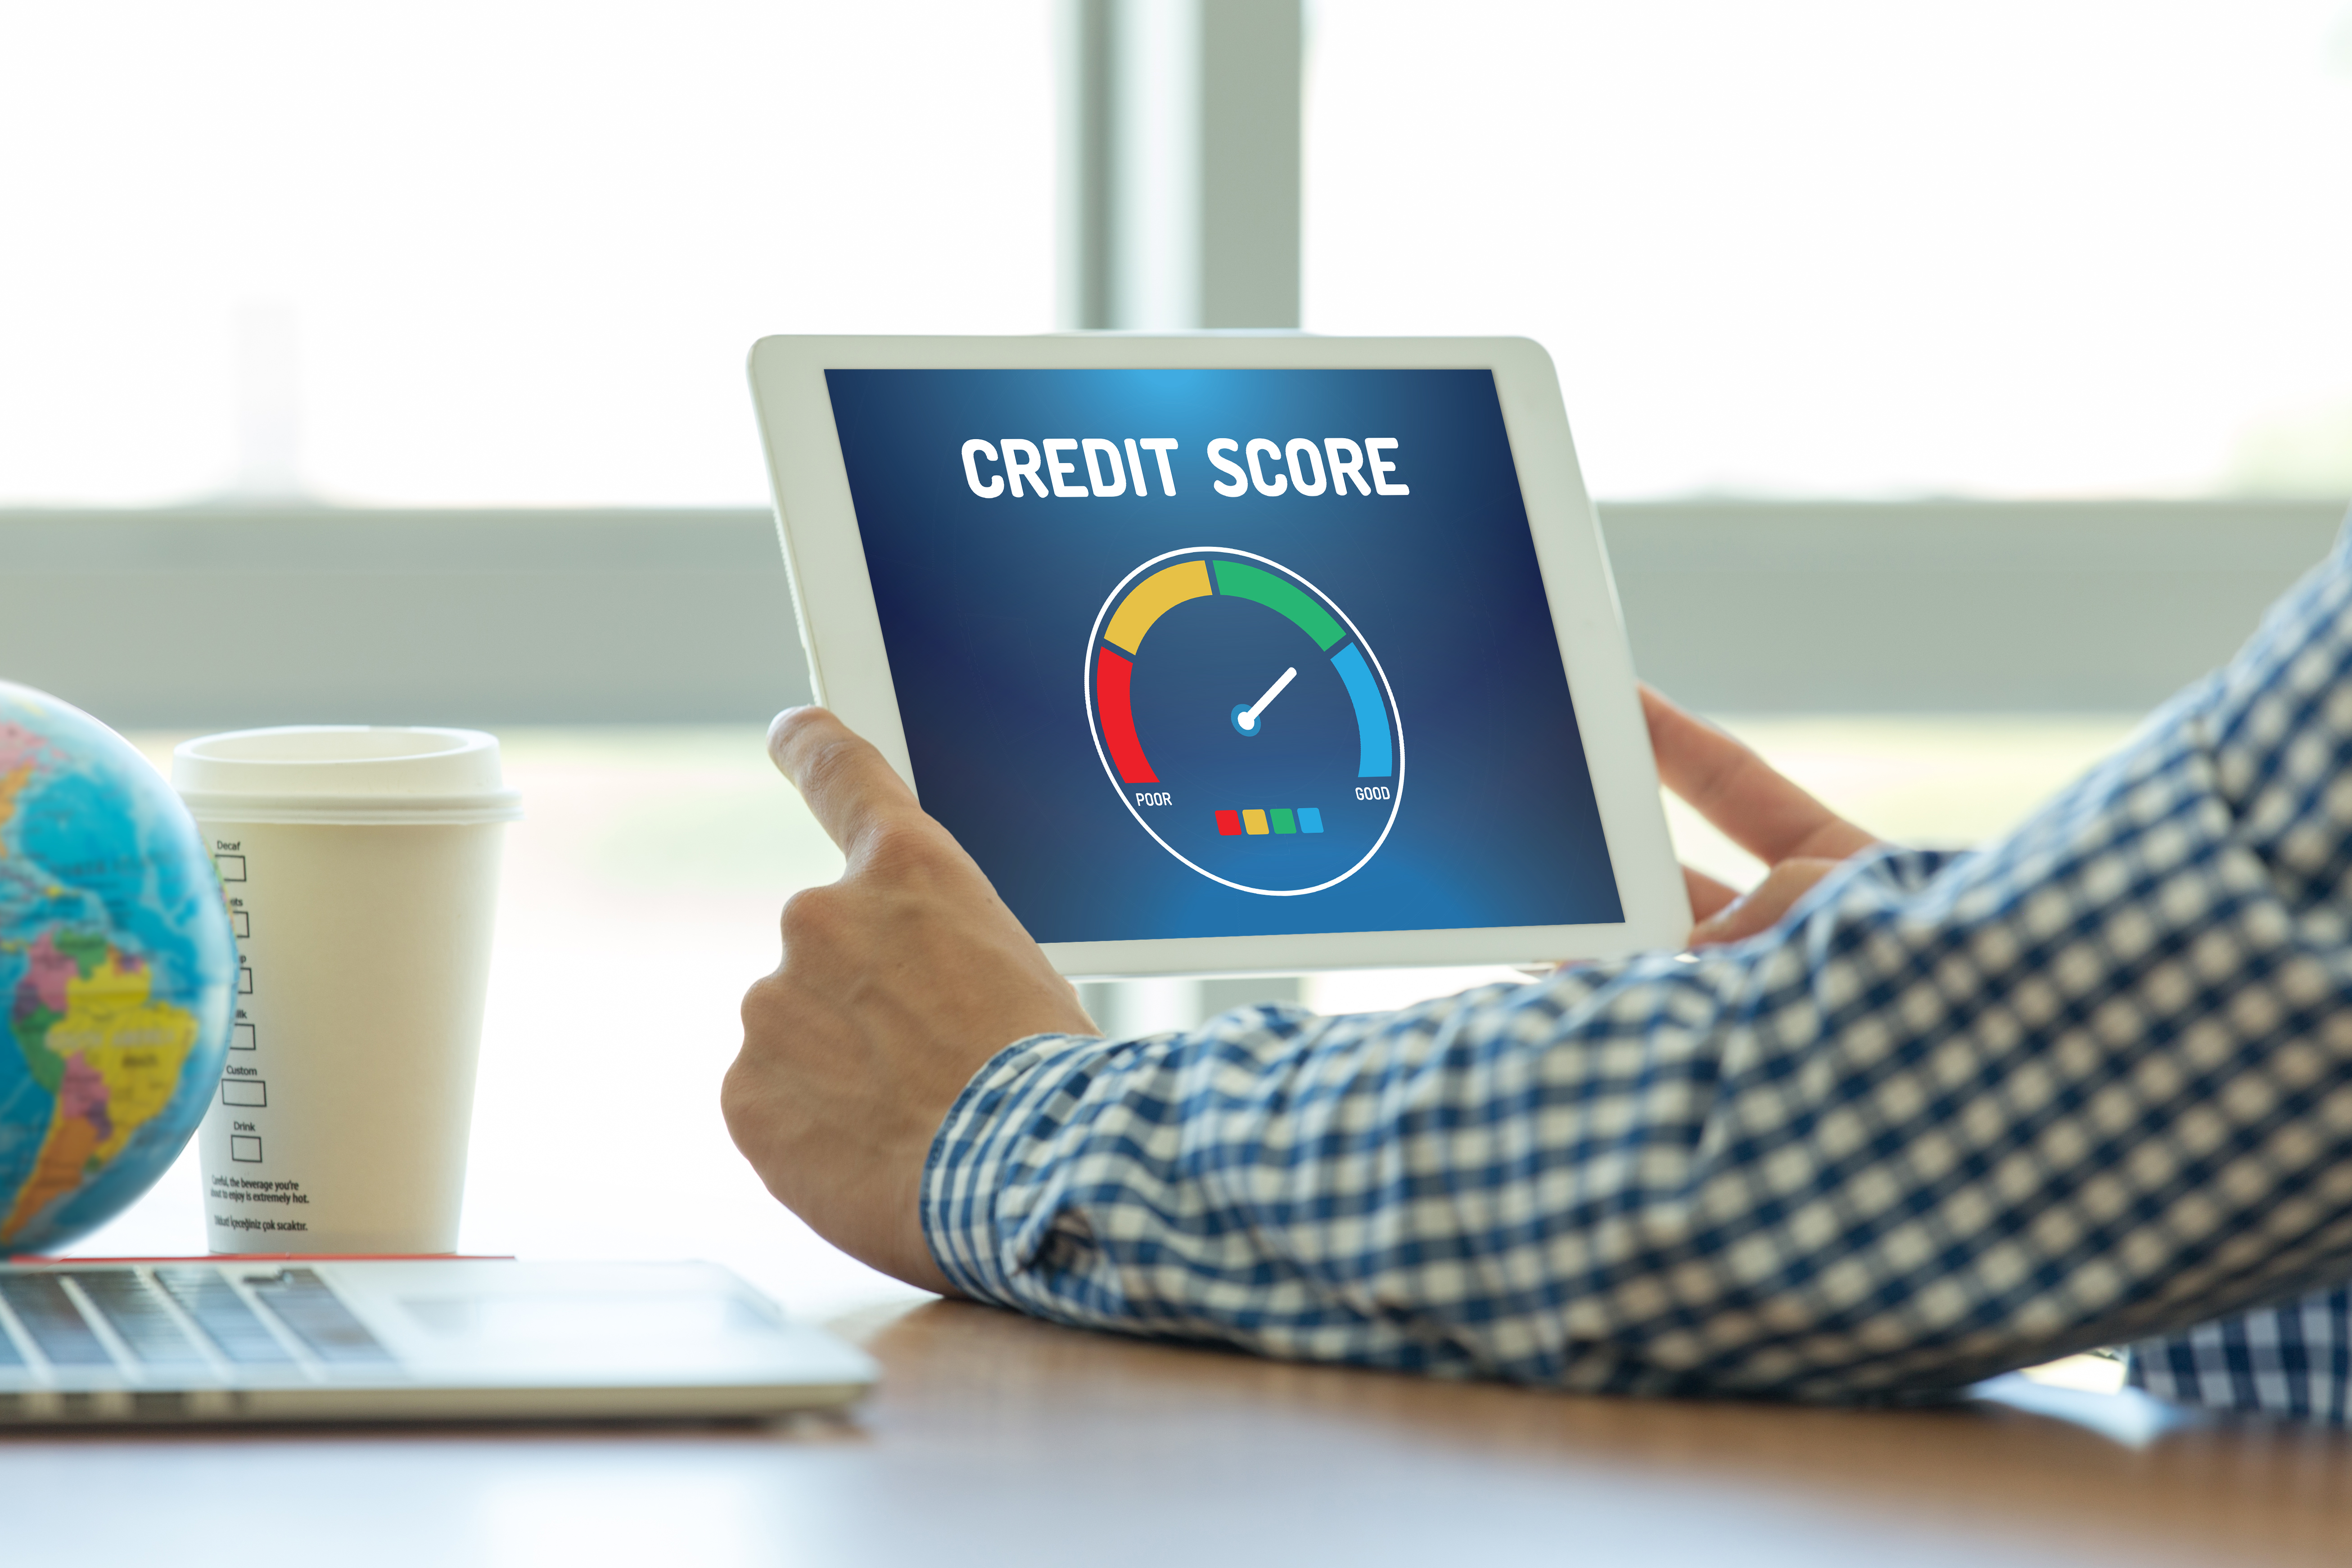 FHFA Announces Next Phase of Public Engagement Process for Updated Credit Score Requirements